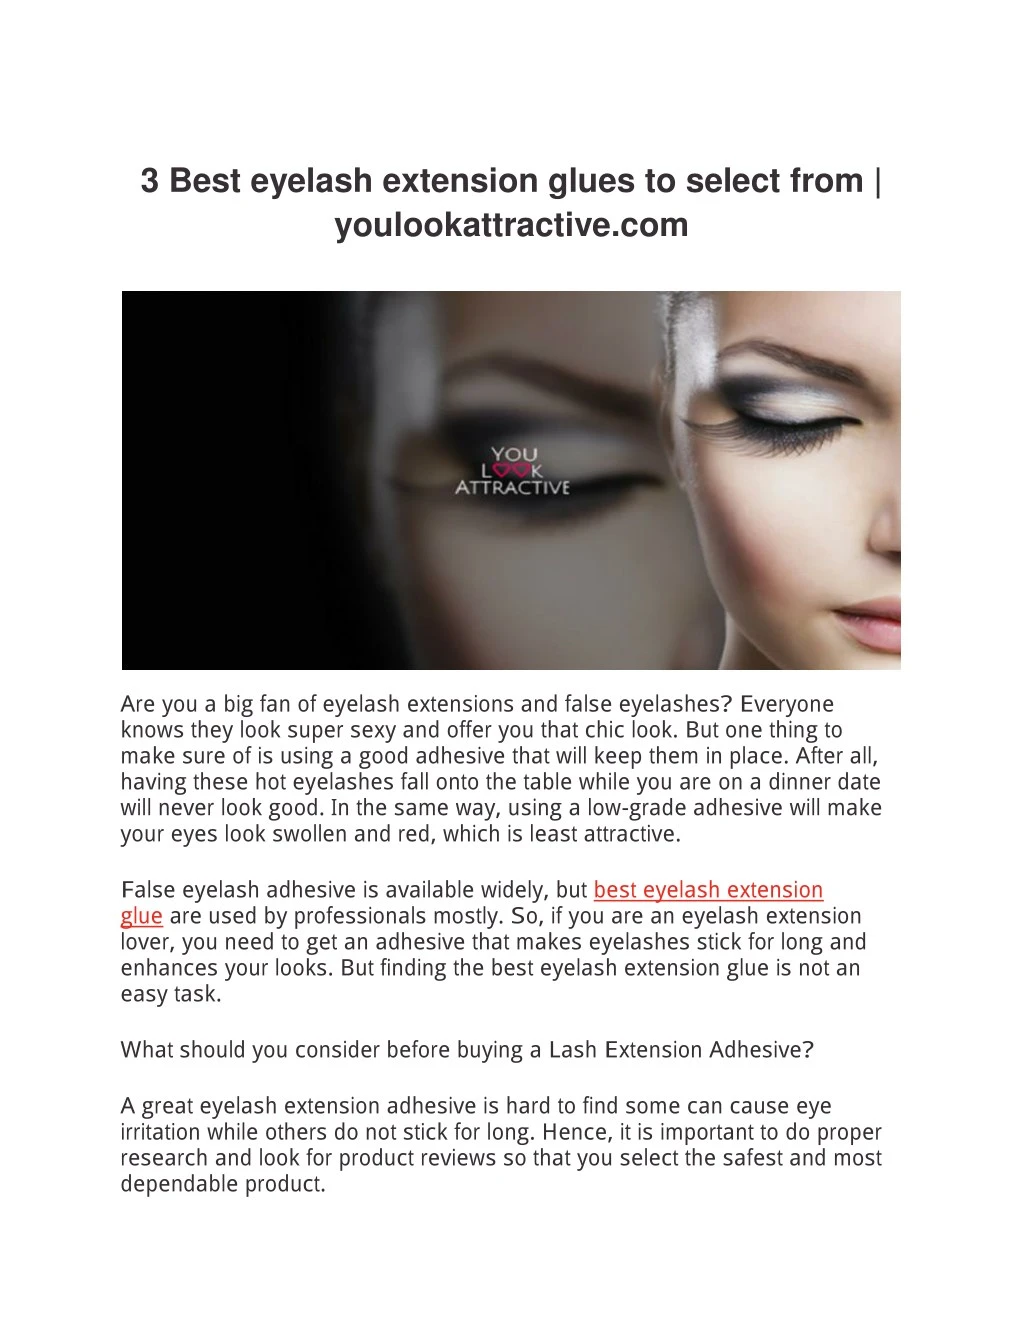 3 best eyelash extension glues to select from